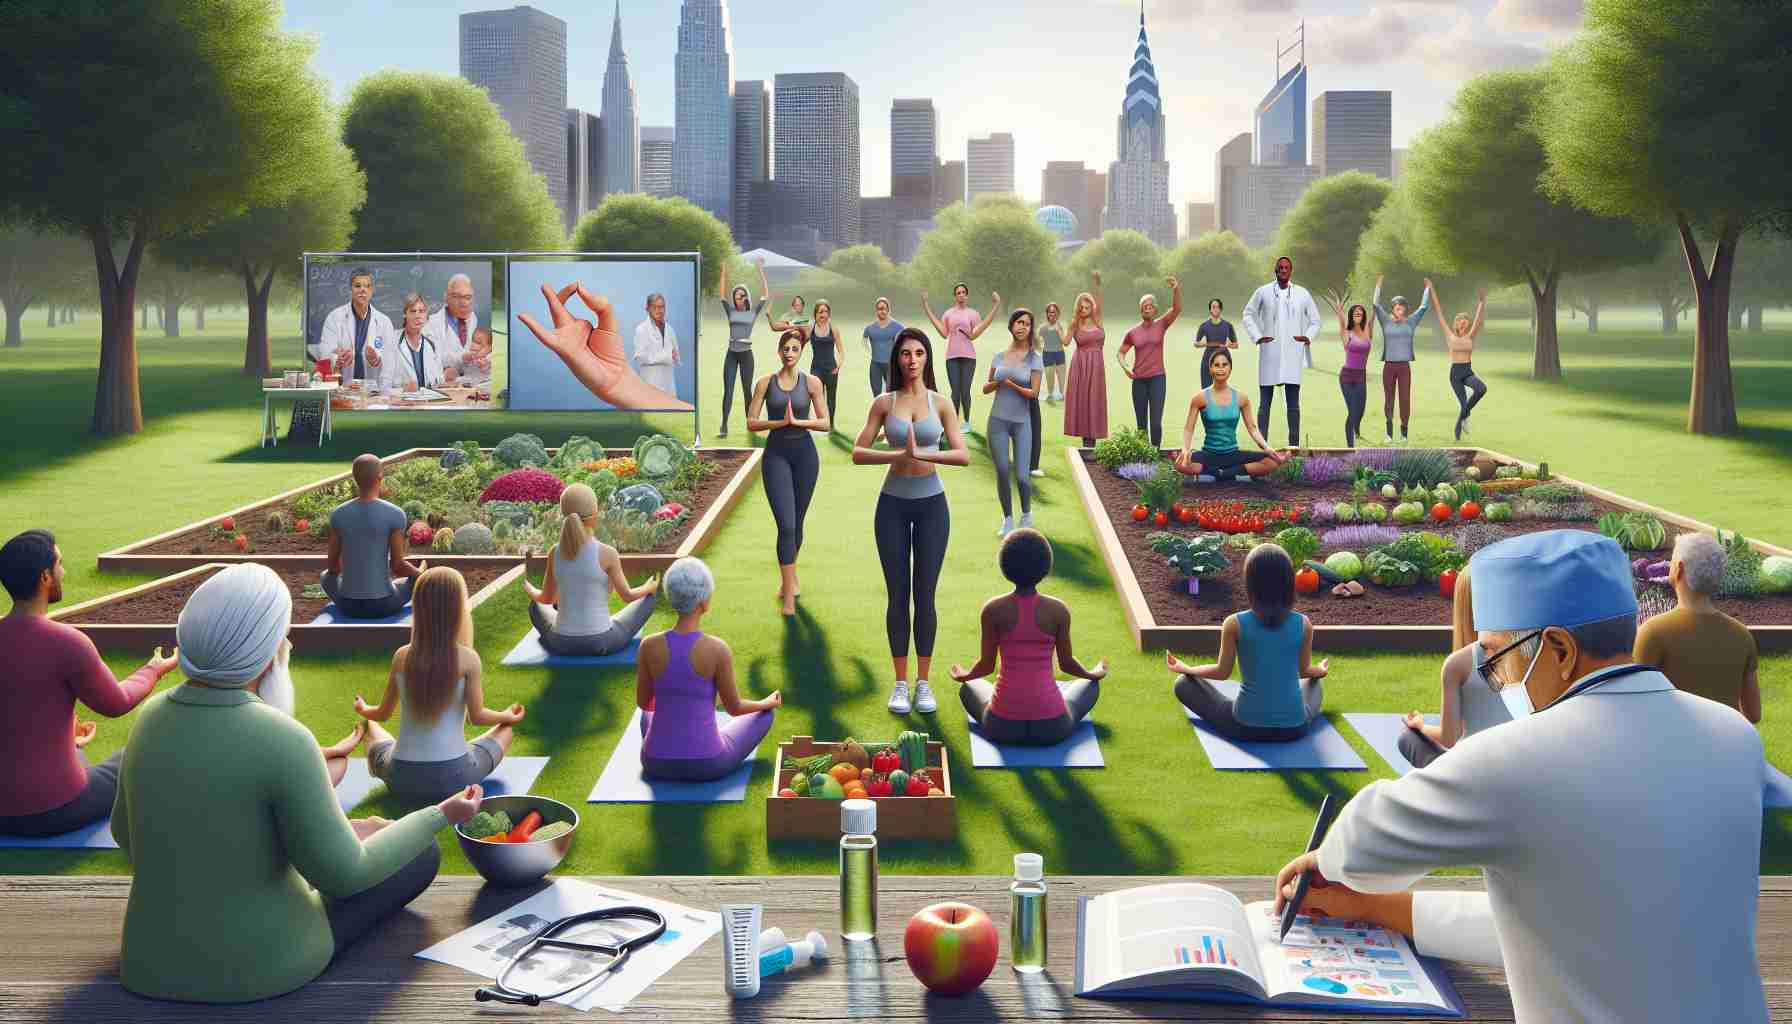 Generate a realistic HD image depicting an involved community promoting health through preventative measures. This could consist of a diverse group of people, like a Caucasian woman leading a yoga class in the park, a Middle-Eastern man giving a presentation about the benefits of healthy eating, a Hispanic grandmother teaching her grandchildren how to plant vegetables in a communal garden, and a Black nurse facilitating a vaccination campaign. The scene should highlight harmony, education, and the proactive participation of everyone involved.